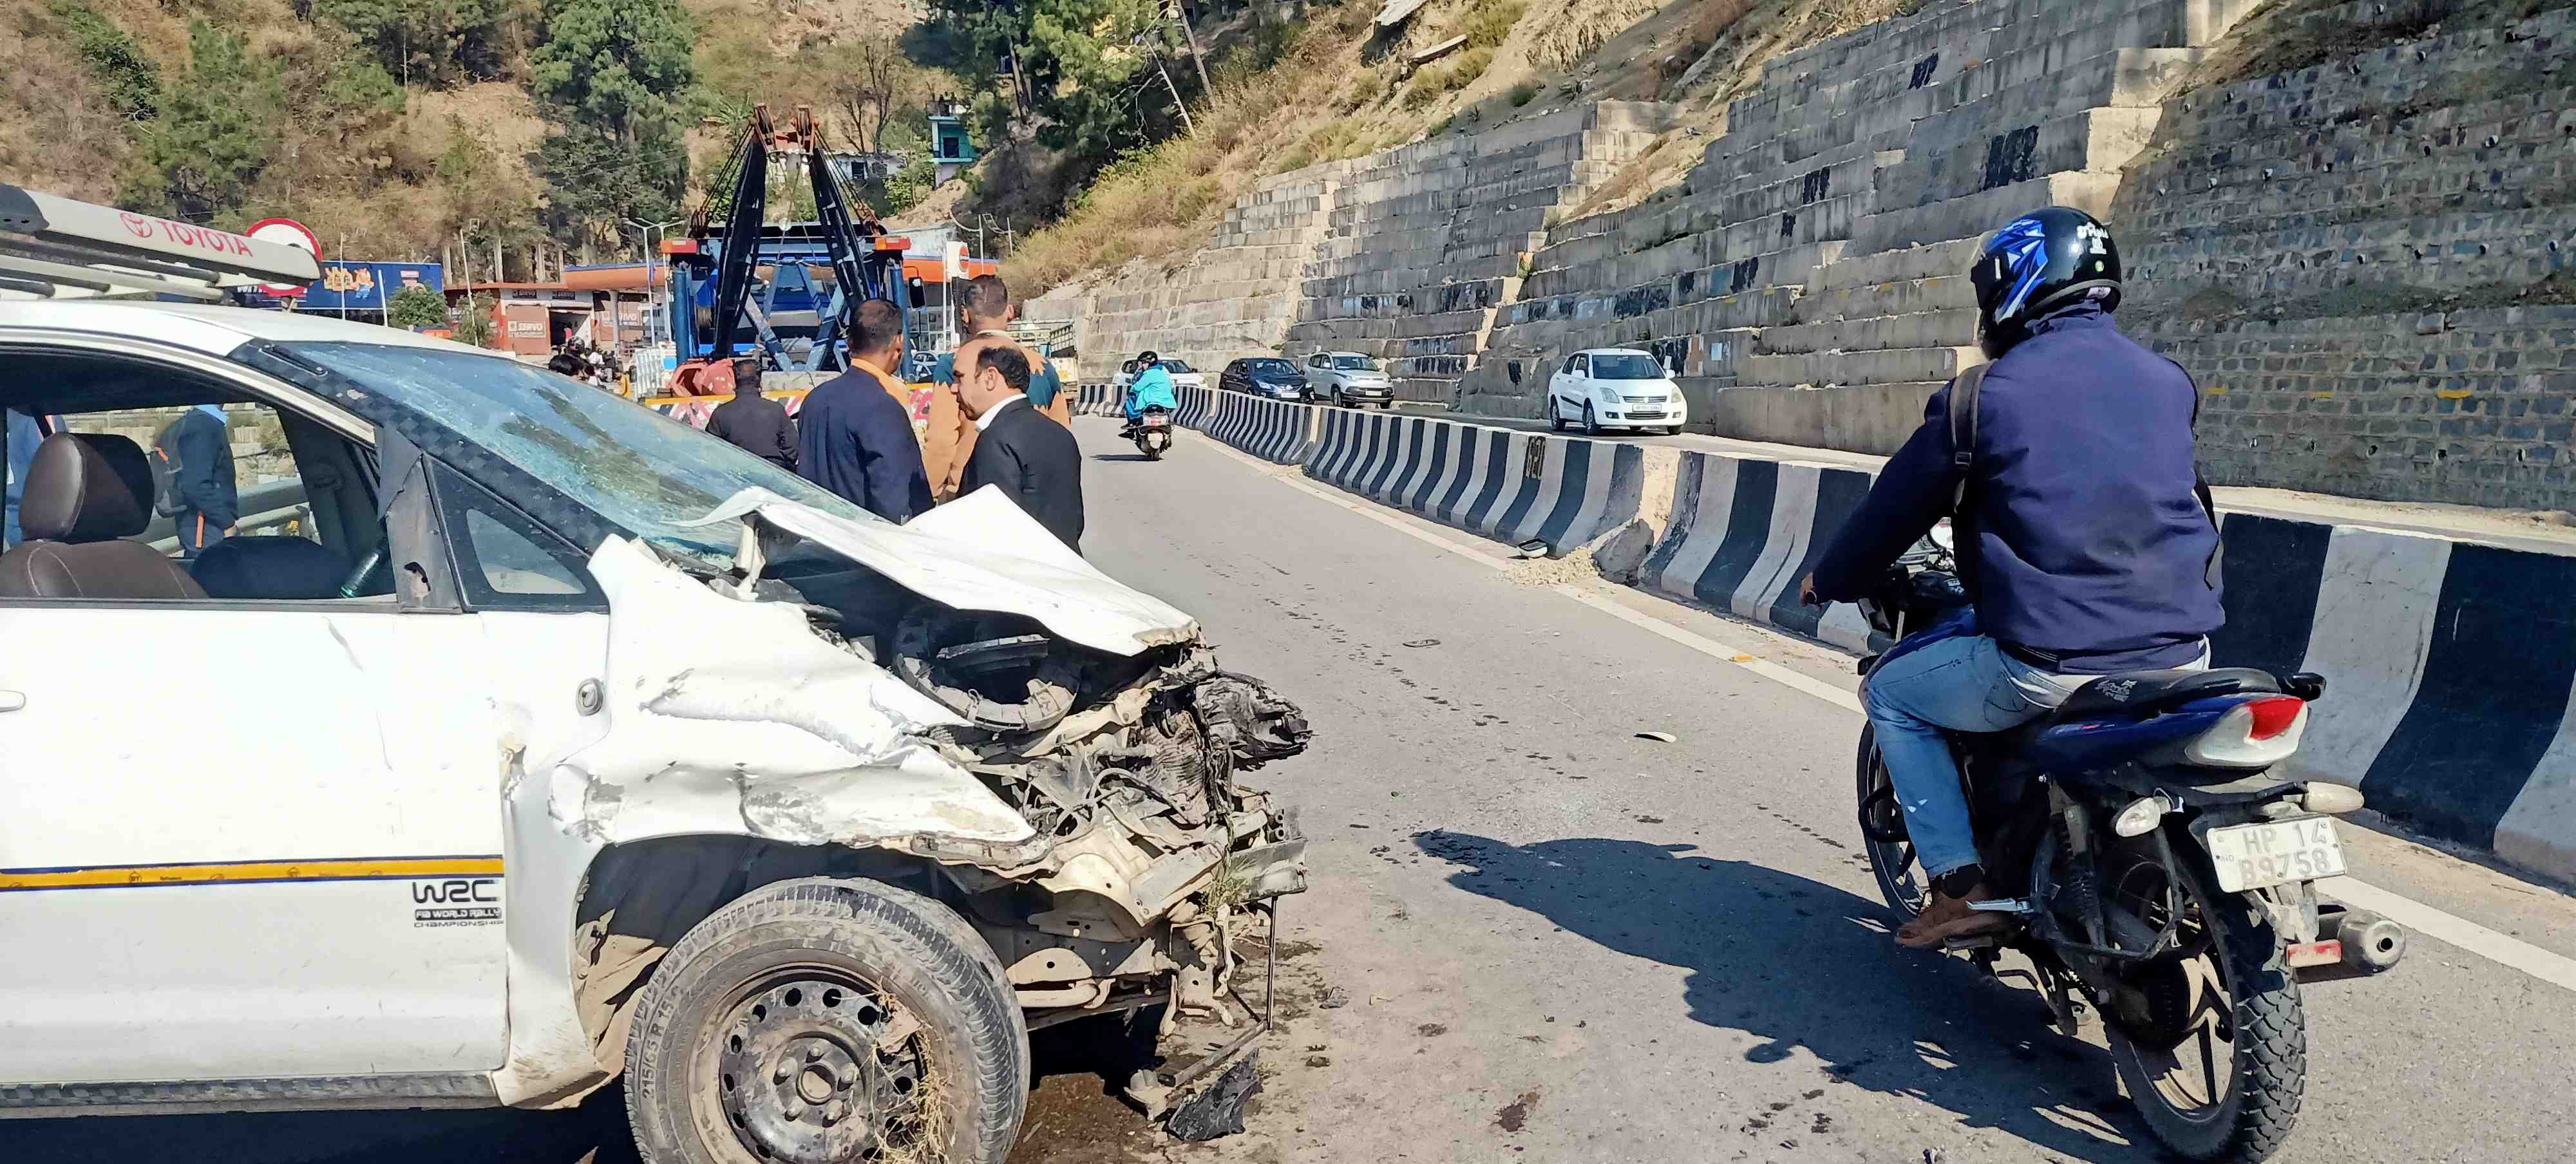 Accident in Himachal